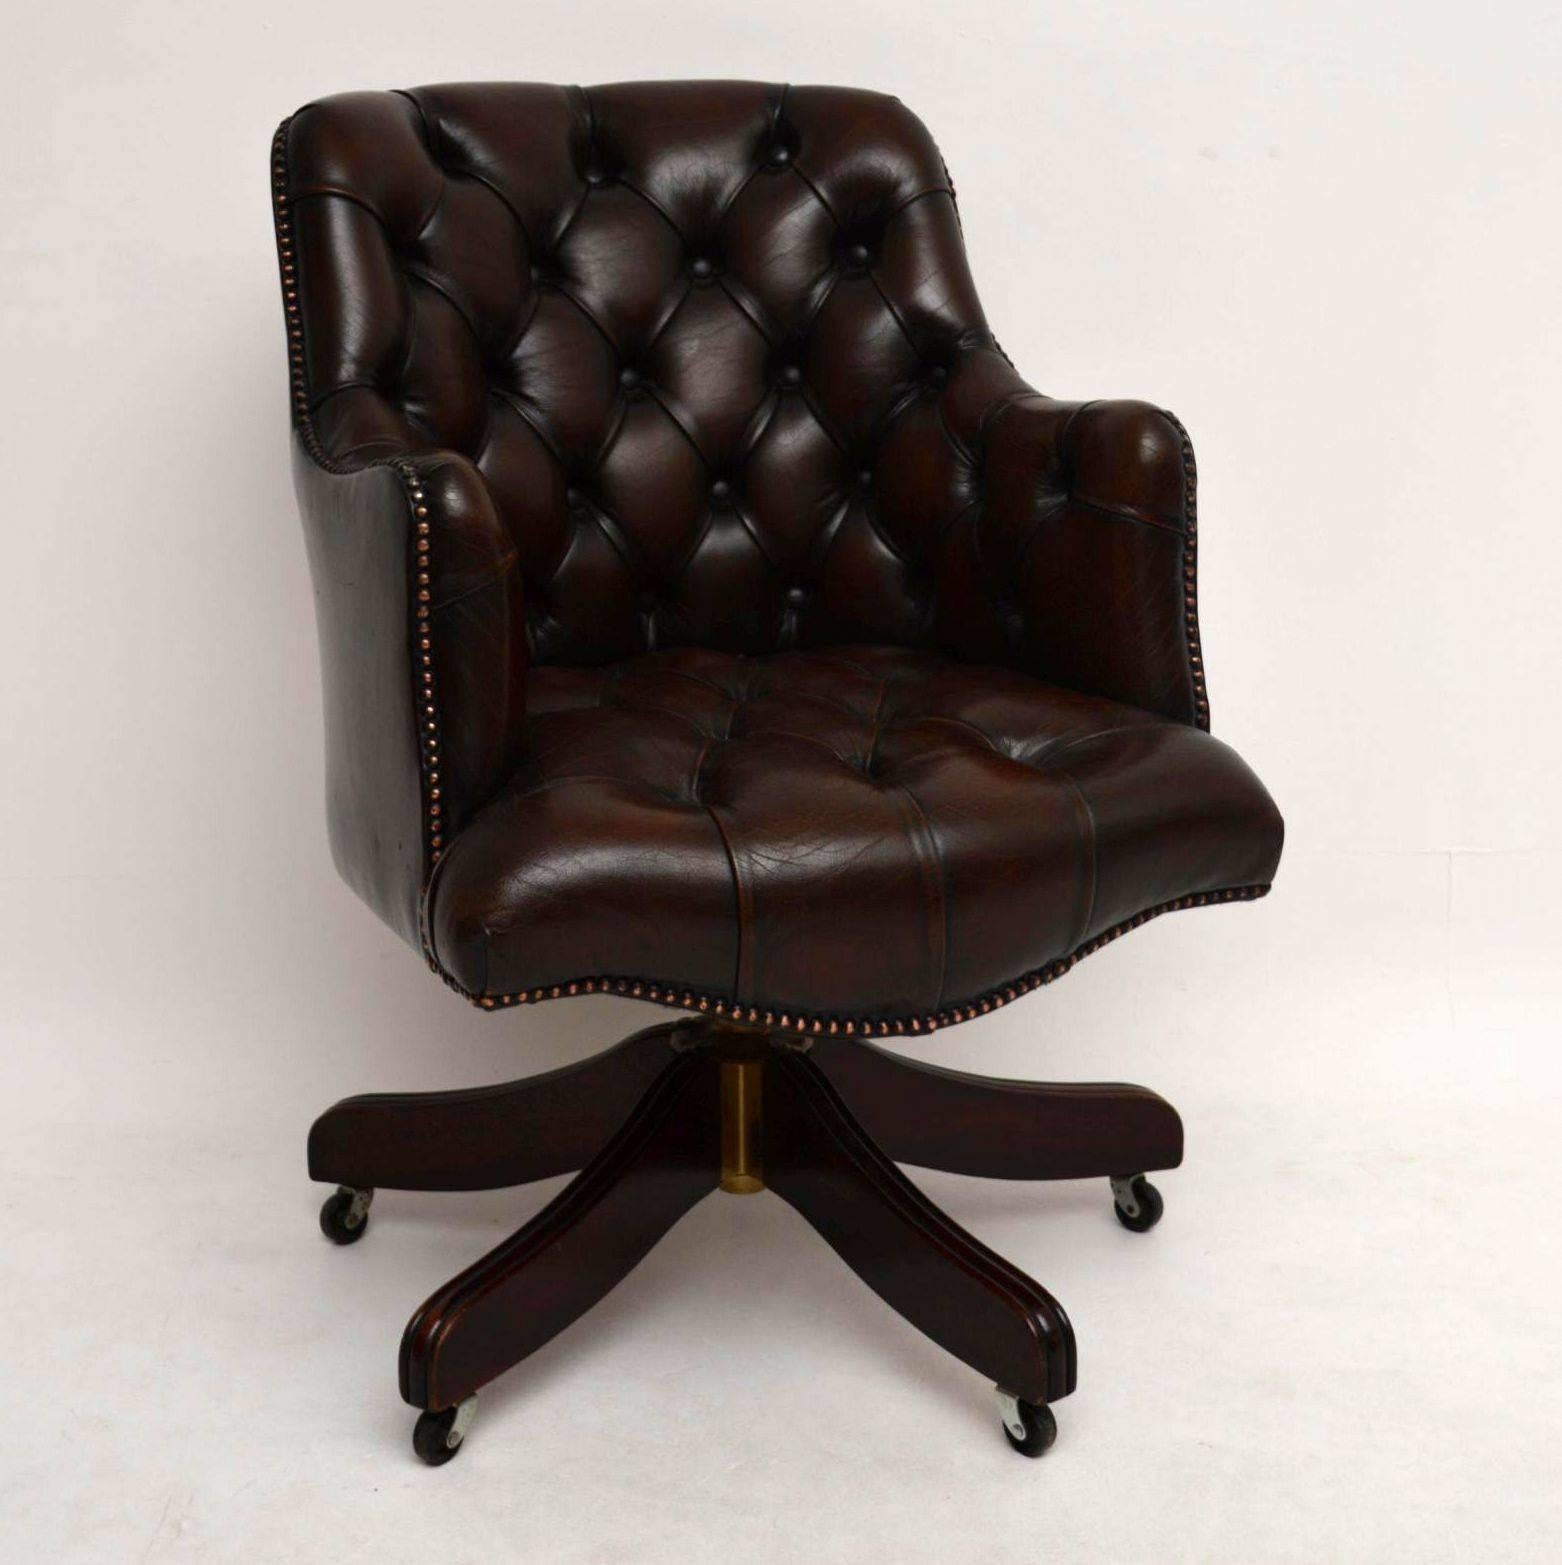 This antique deep buttoned leather swivel desk chair is very comfortable and in good original condition. The leather is all good with no rips or holes and the surface has loads of character. It sits on a mahogany base with wheels underneath. I would